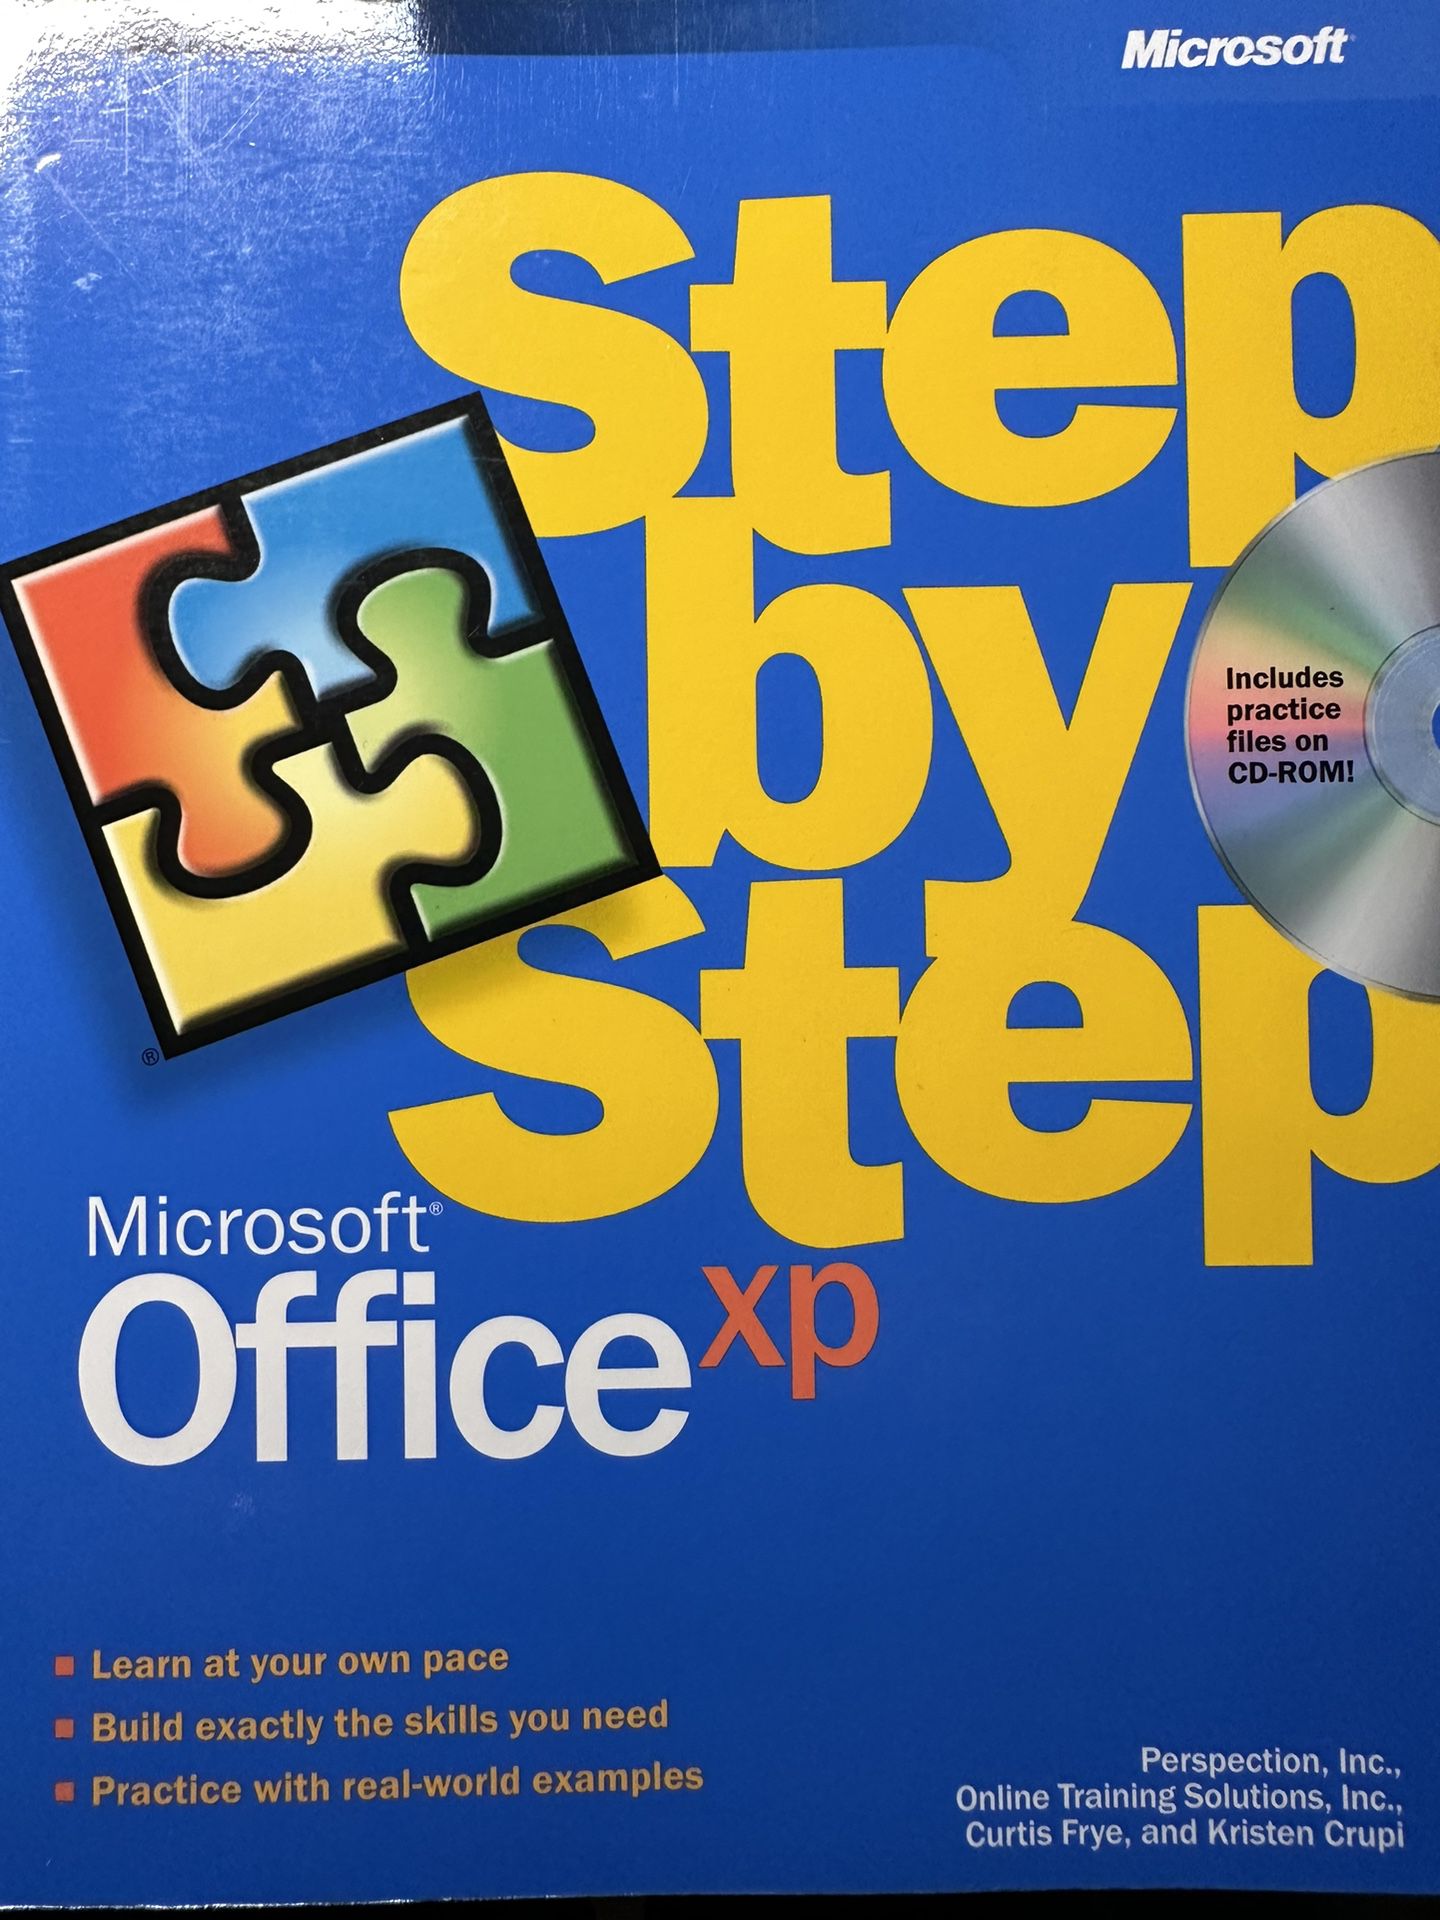 Microsoft Office XP How-To Book